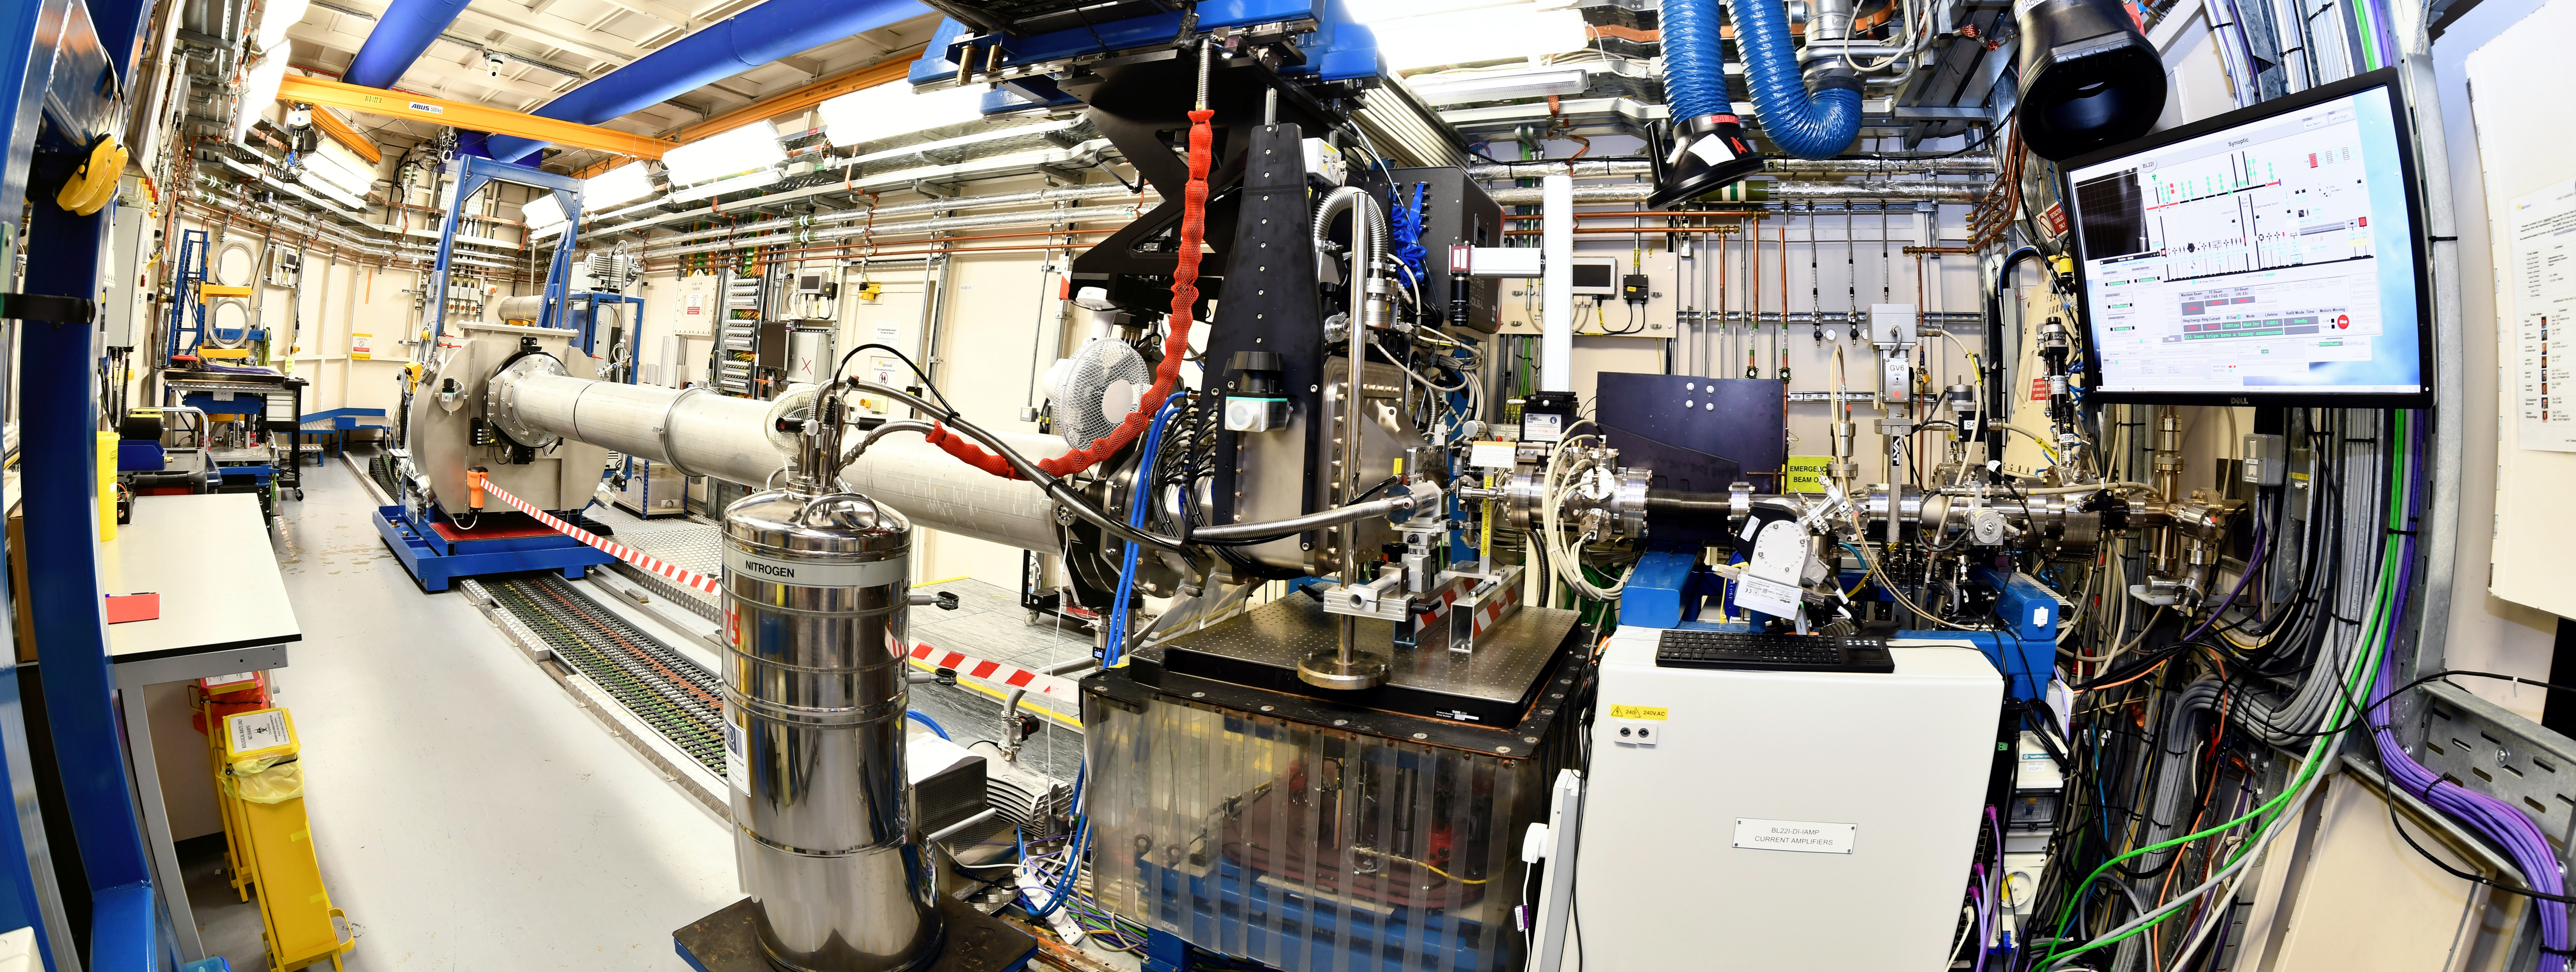 The Experimental Hutch of Beamline I22 at Diamond Light Source. Copyright of Diamond Light Source Ltd.